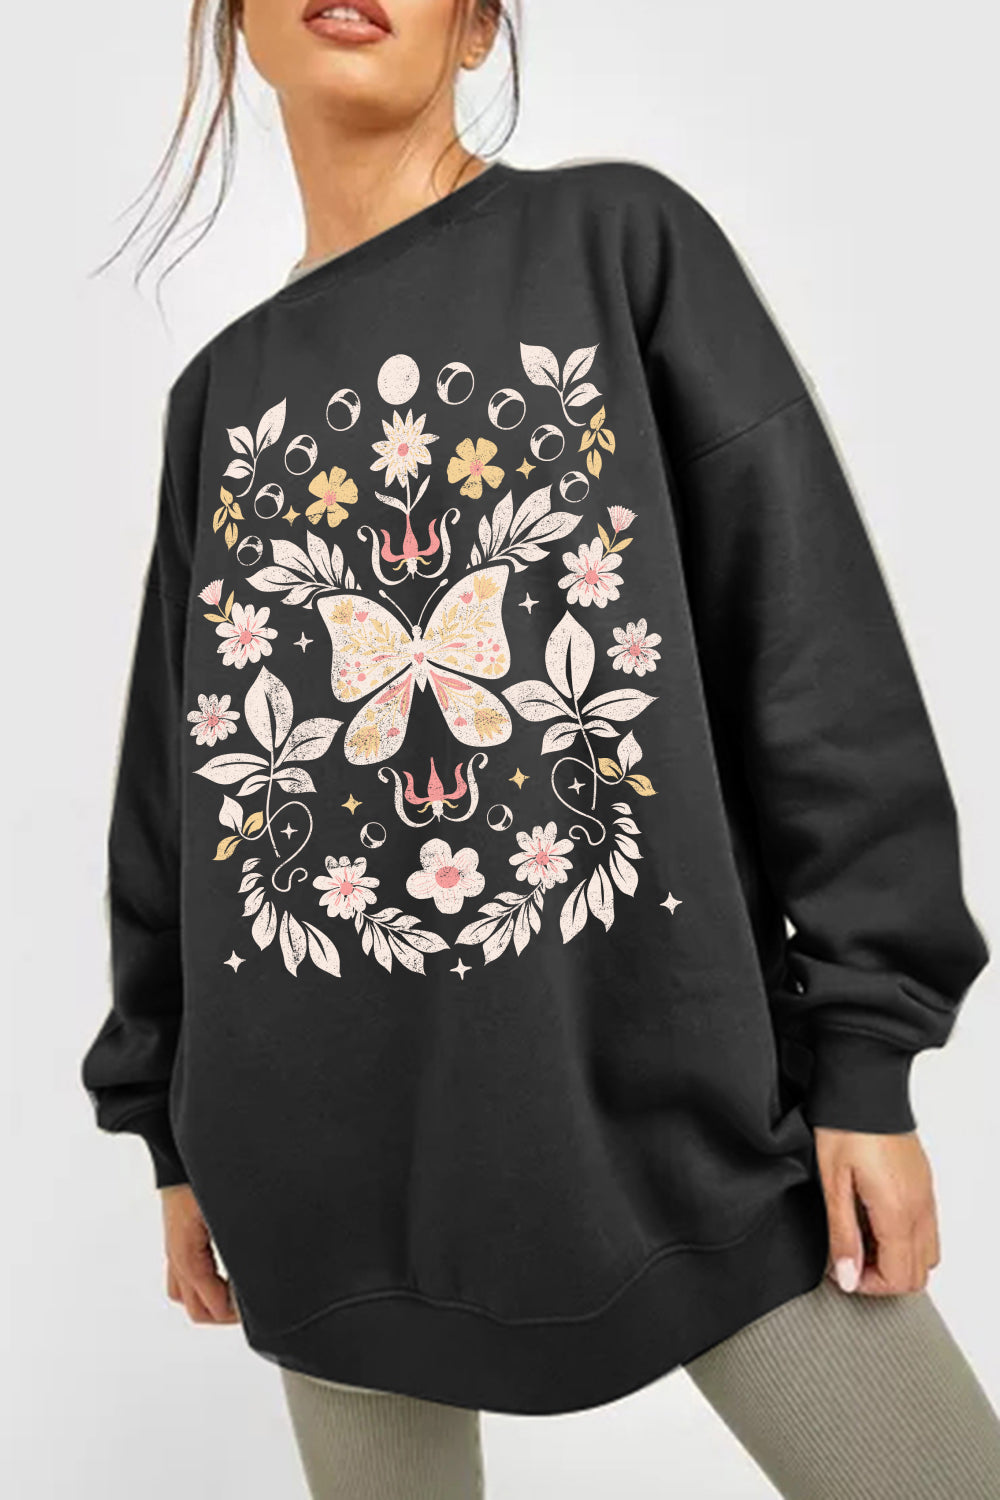 Simply Love Full Size Flower and Butterfly Graphic Sweatshirt